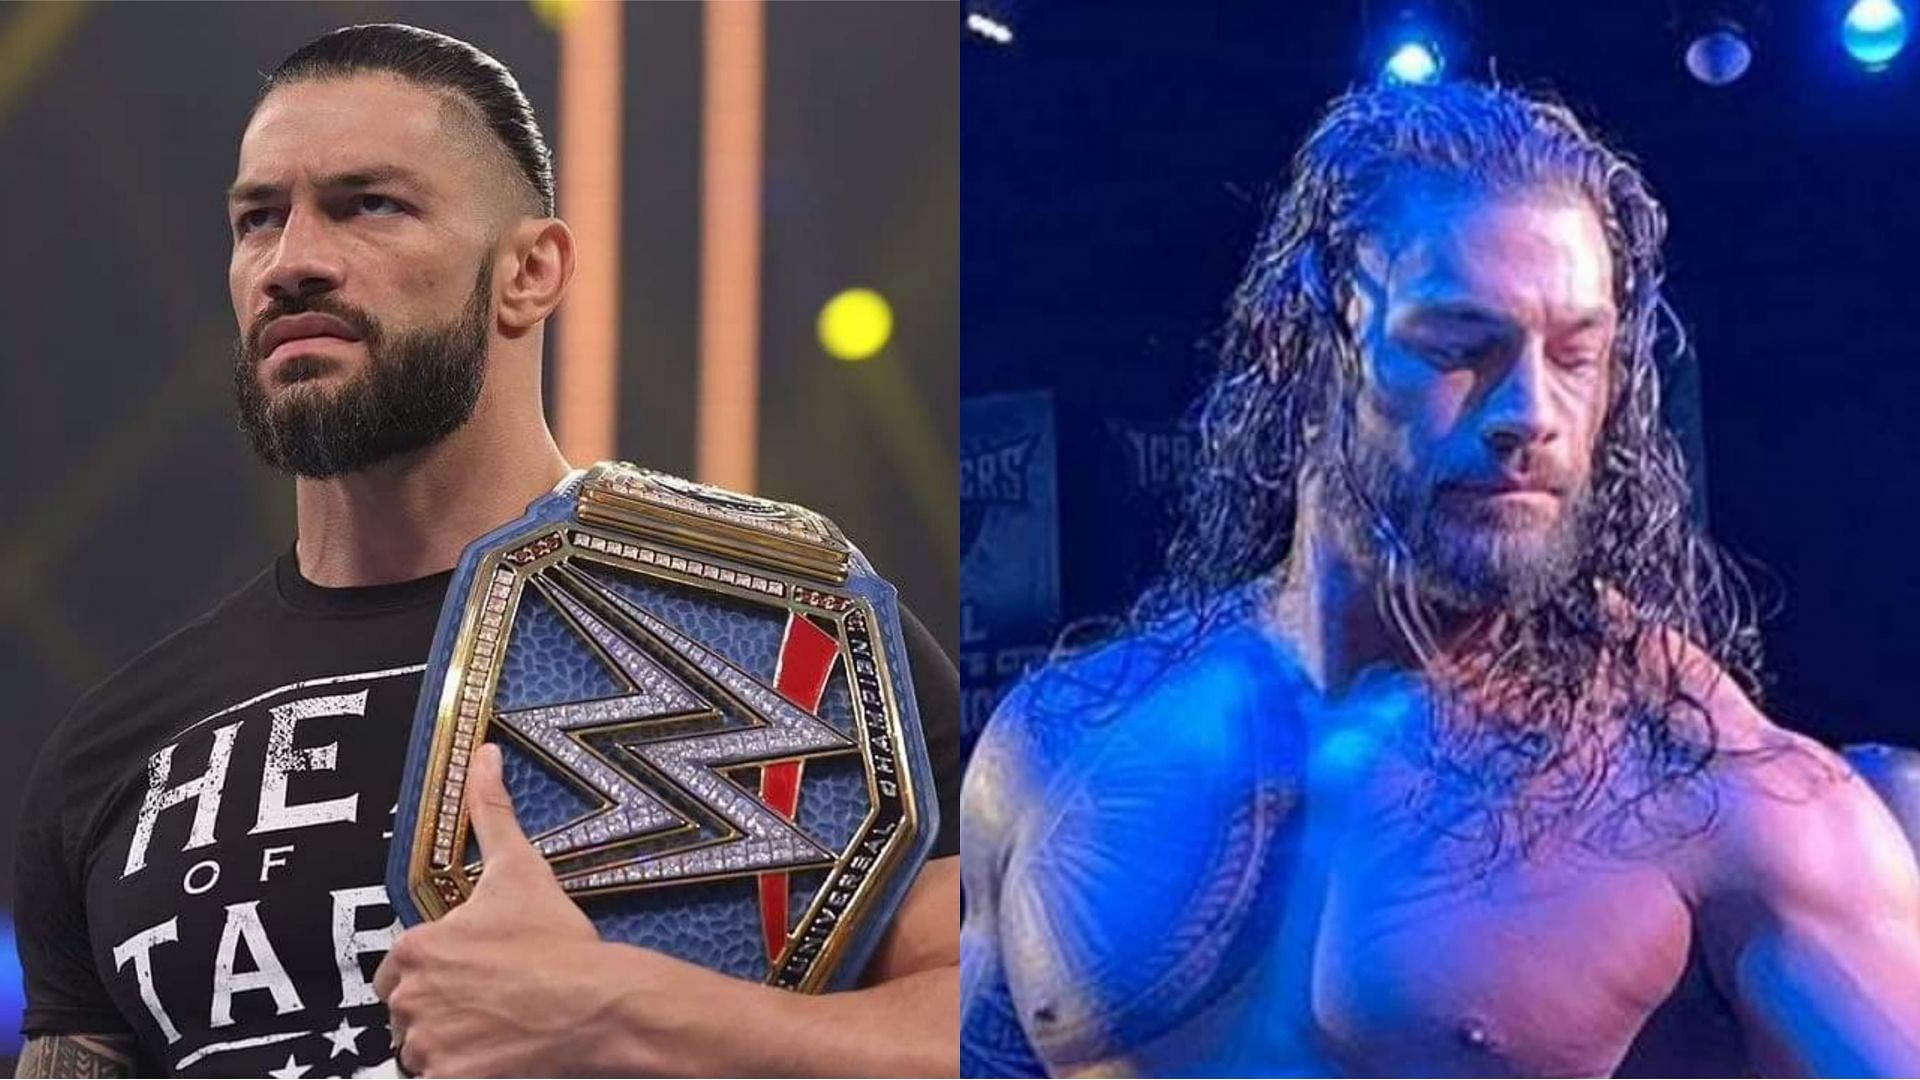 Roman Reigns is now on a part-time WWE contract.